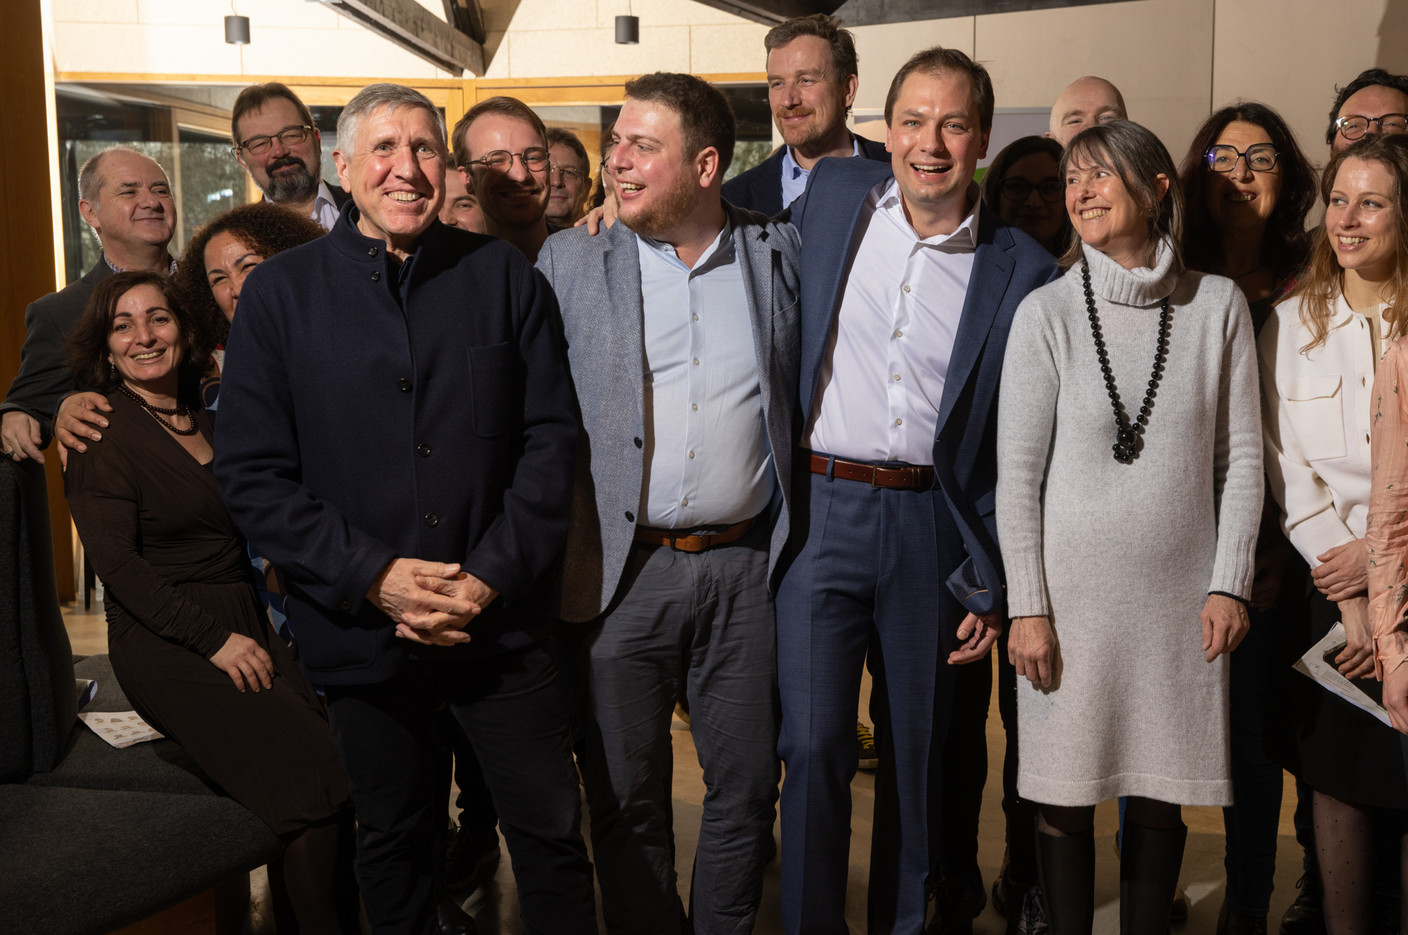 The leadership of the Déi Gréng party, co-chaired by Djuna Bernard and Meris Sehovic, was also present at the event, which took place in the Merl Park pavilion on Friday.   Photo: Guy Wolff/Maison Moderne